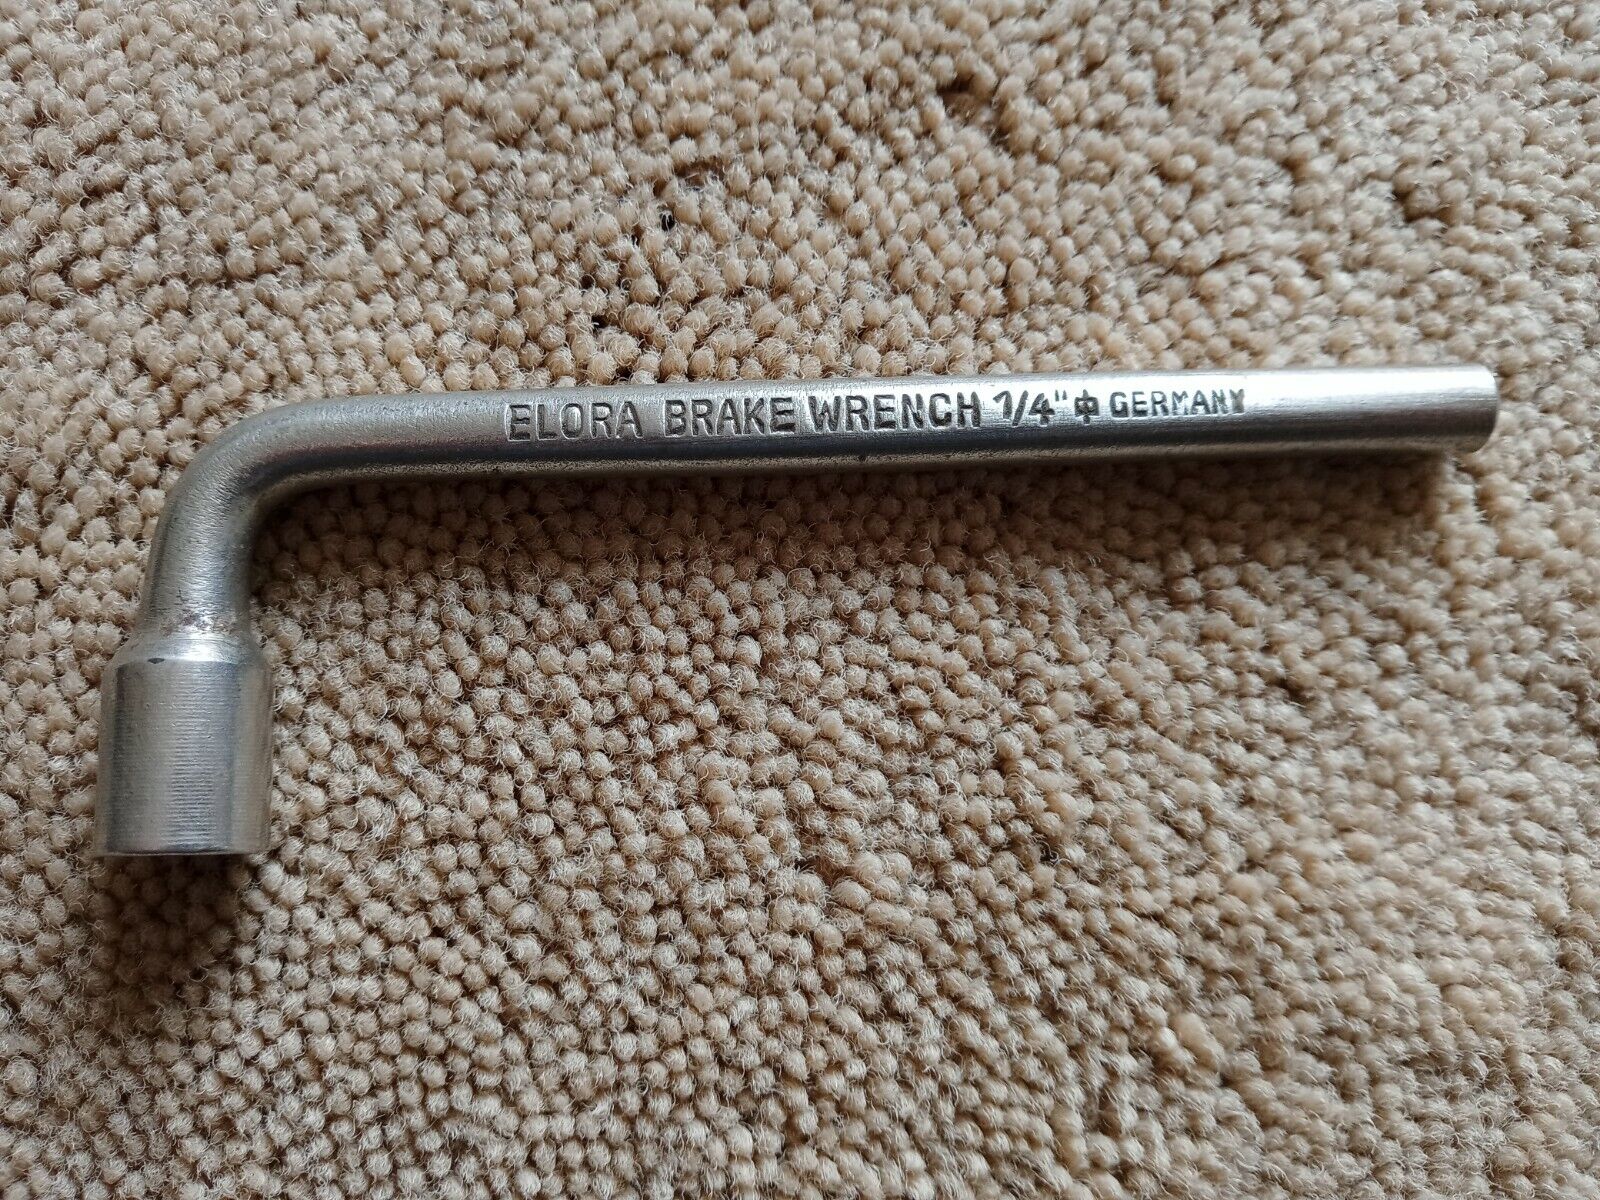 Brake Spanner / Wrench Made By Elora